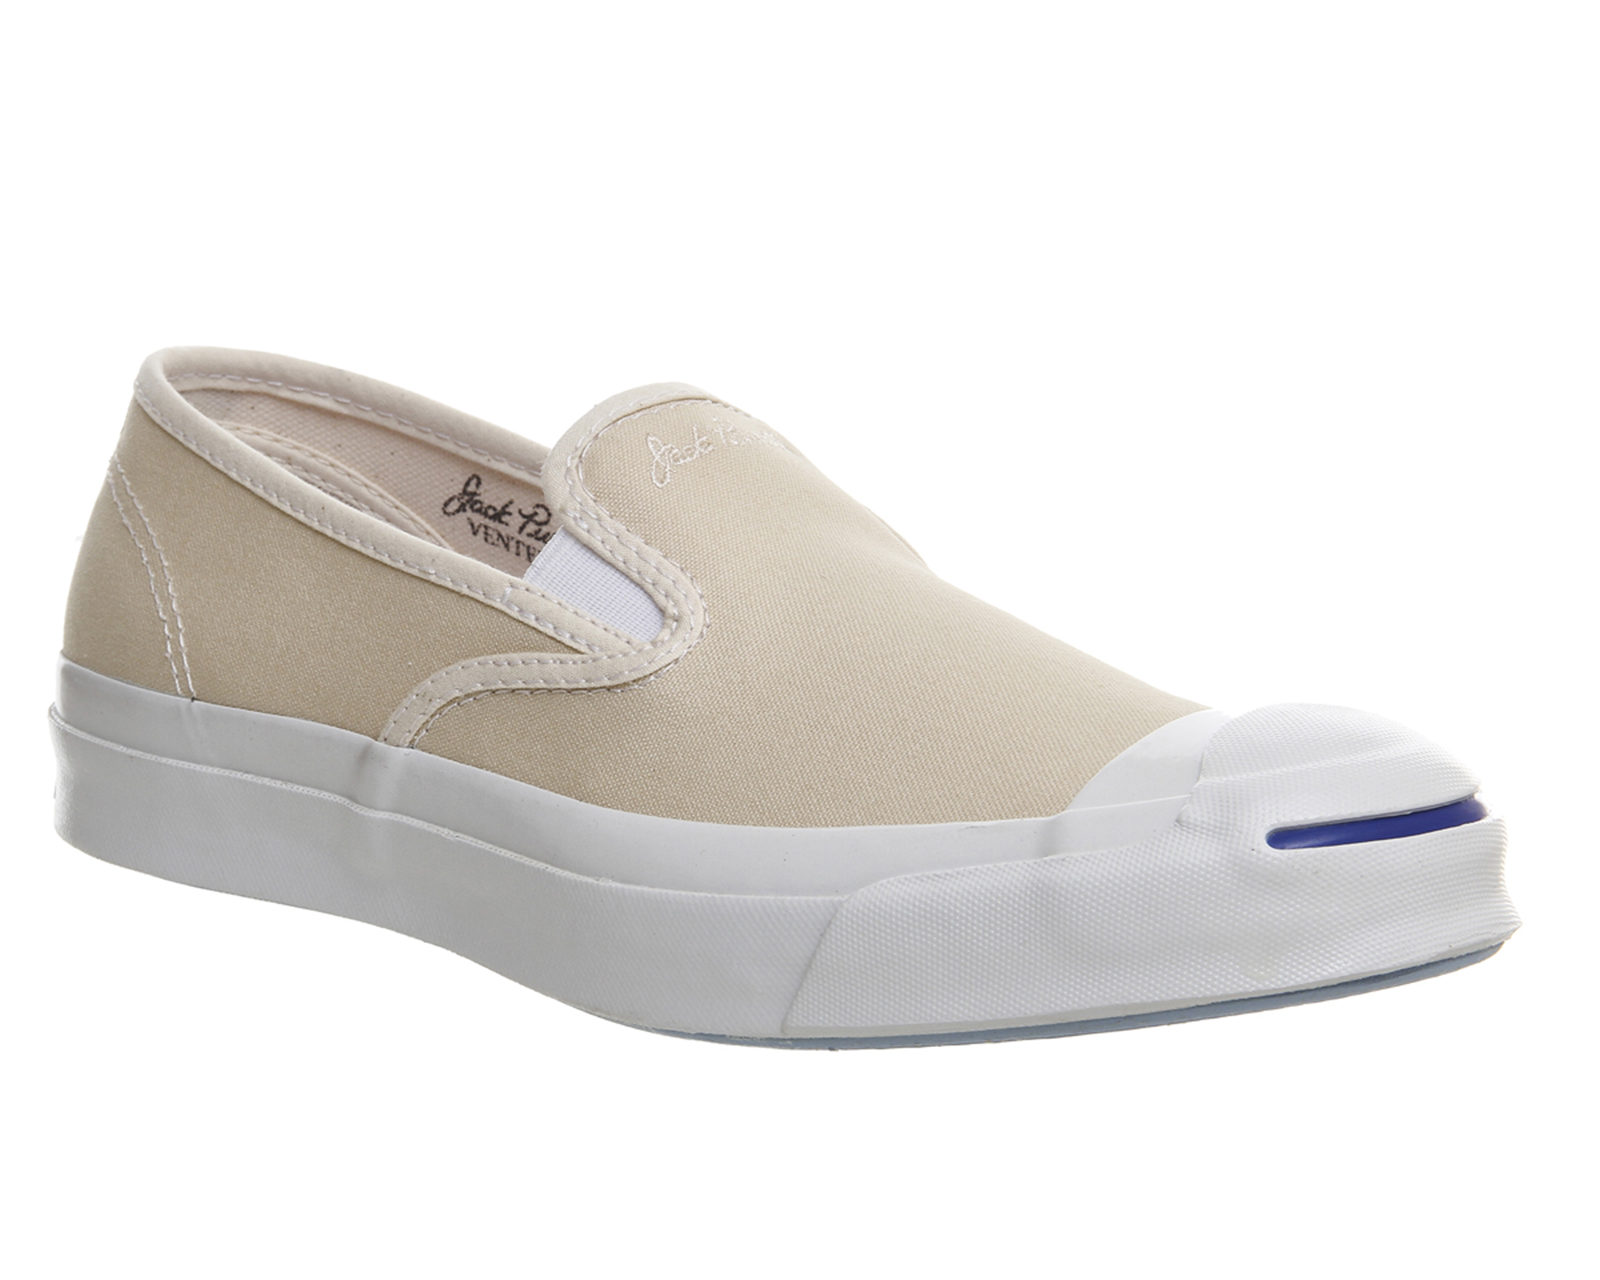 Converse Jack PurcellJack Purcell Signature Slip OnNatural White